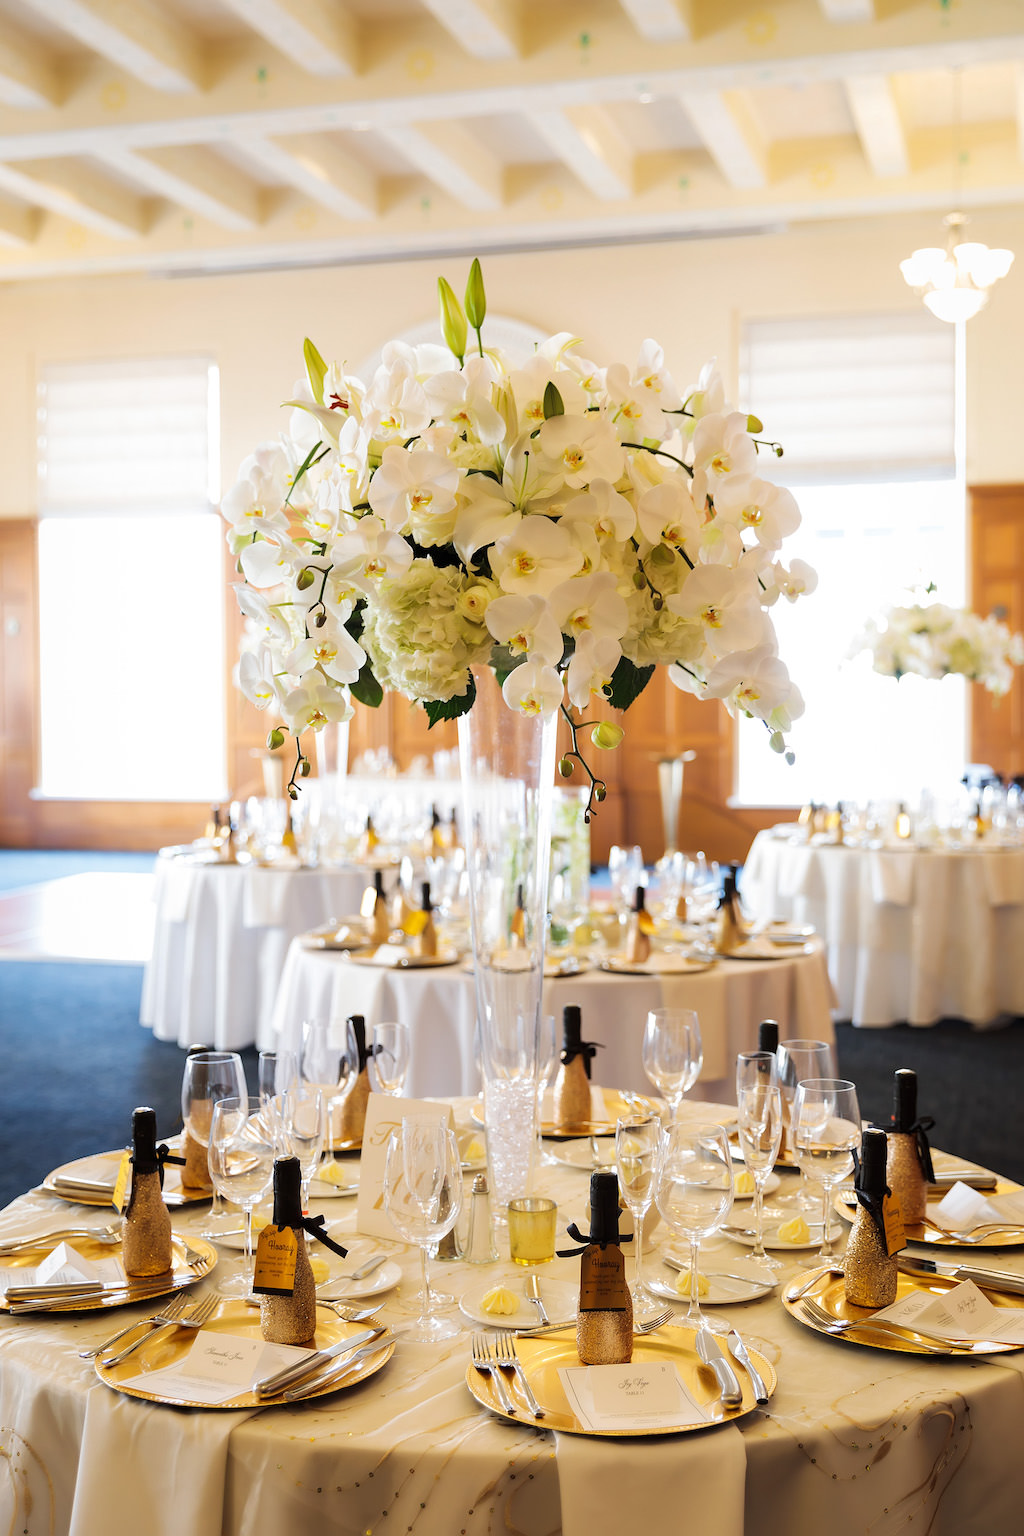 Hotel Ballroom Wedding Reception with Round Tables, Tall Glass Vases with White Orchids Centerpieces, White Tablecloths and Mini Champagne Bottles | Historic Courthouse Downtown Tampa Hotel Venue Le Meridien | Rentals Kate Ryan Linens